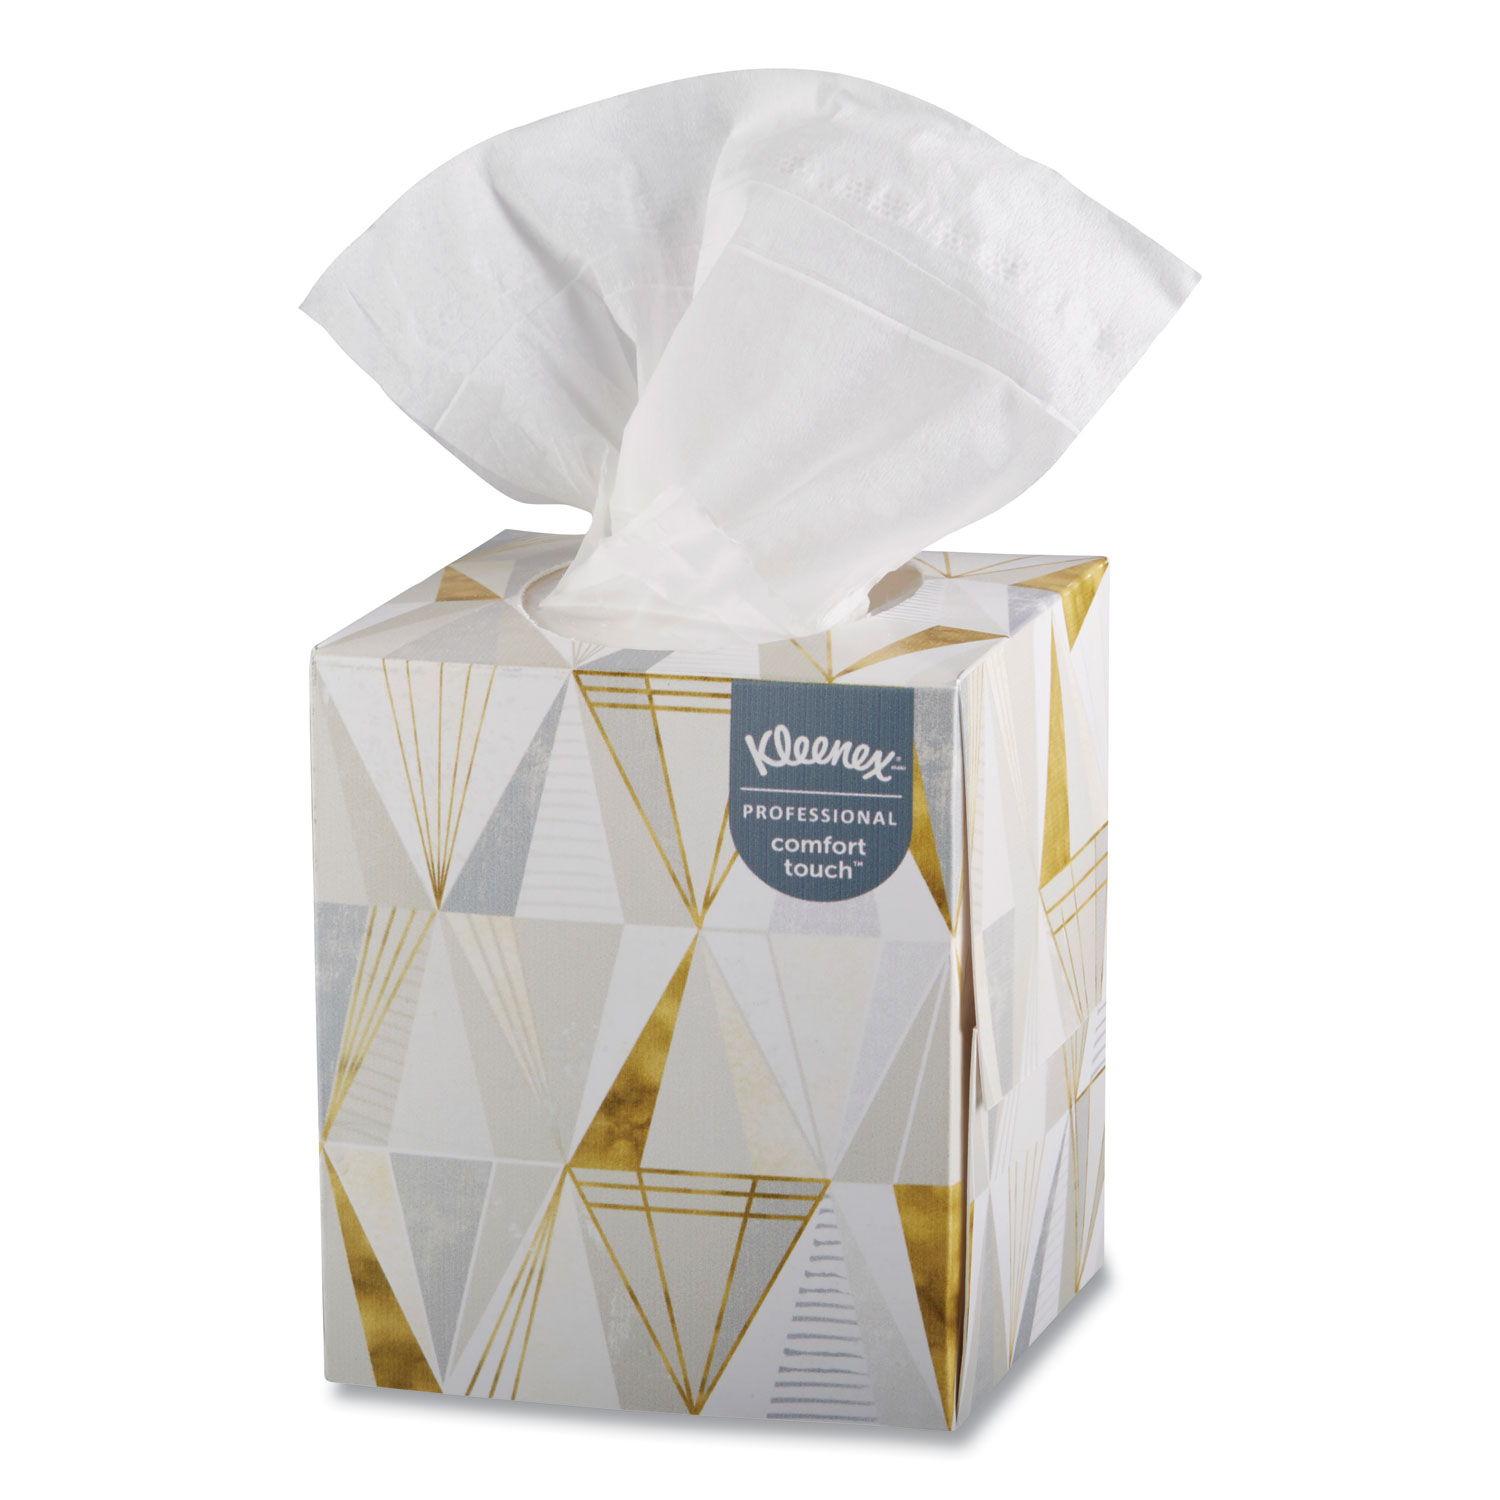  Kleenex 21200 Boutique White Facial Tissue, 2-Ply, Pop-Up Box, 95 Sheets/Box, 3 Boxes/Pack (KCC21200) 